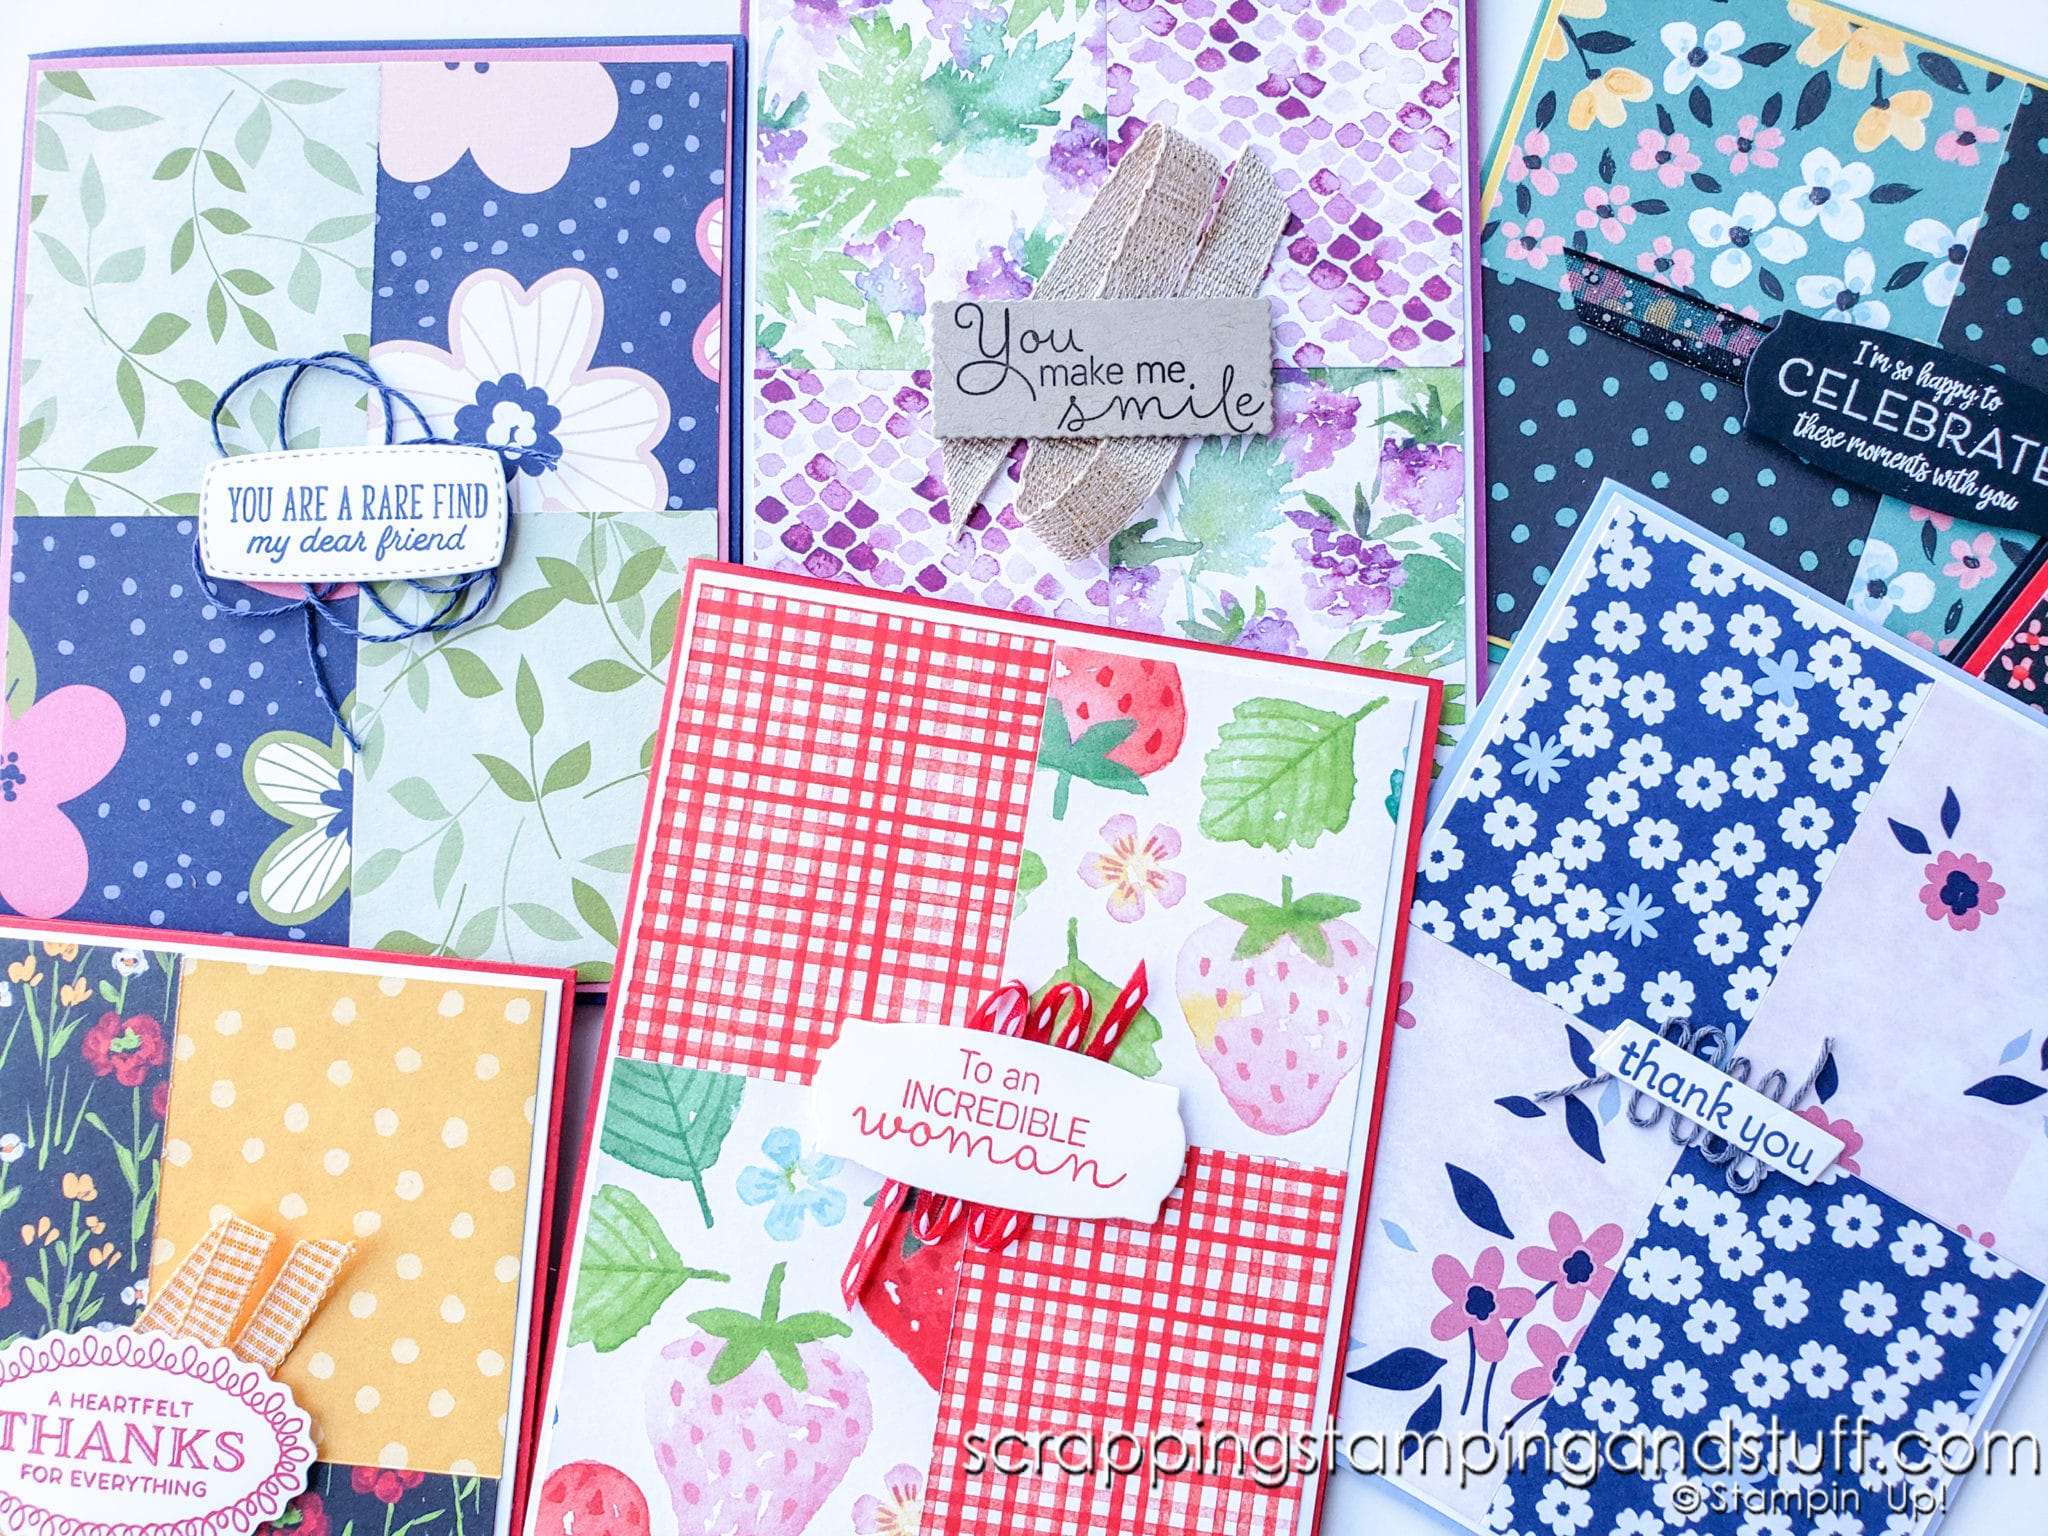 Quadrant Card Design Allows You To Use BOTH Sides of Your Pretty Papers!